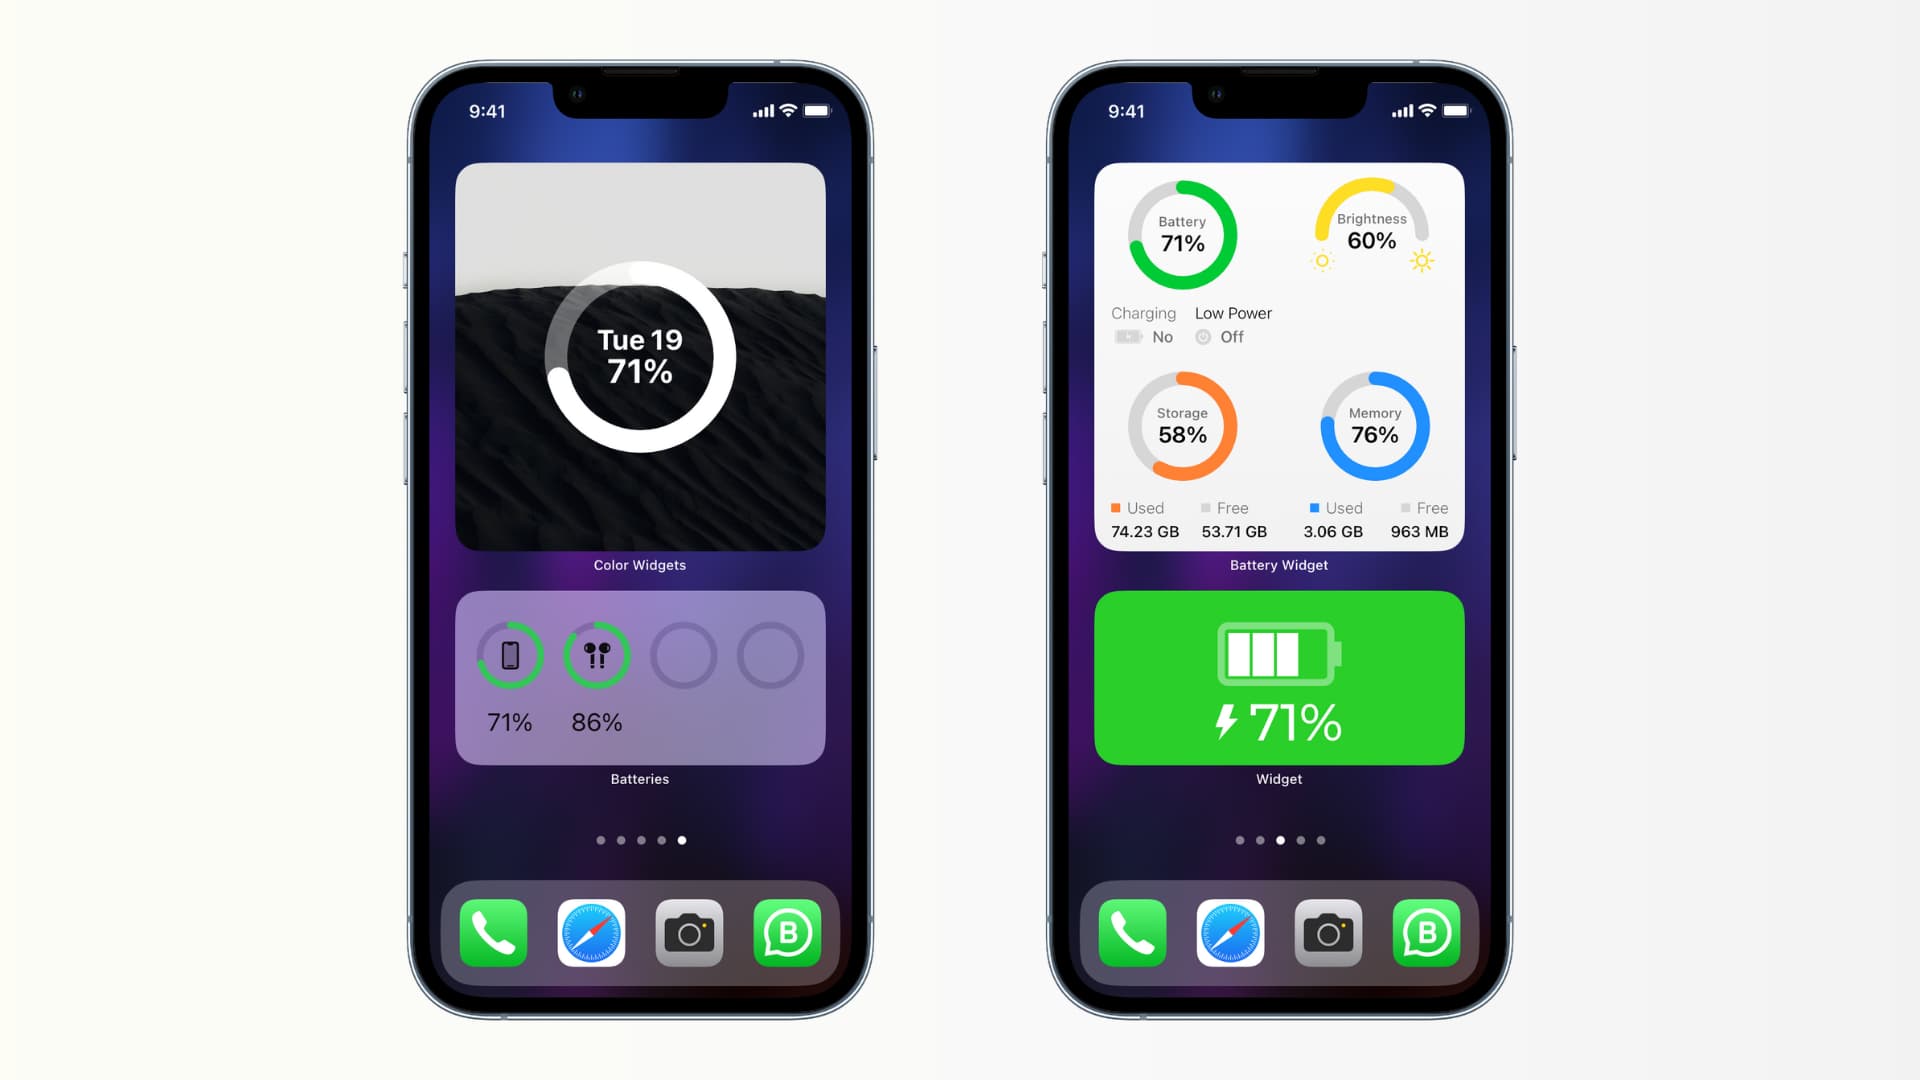 The best battery widget apps for iPhone